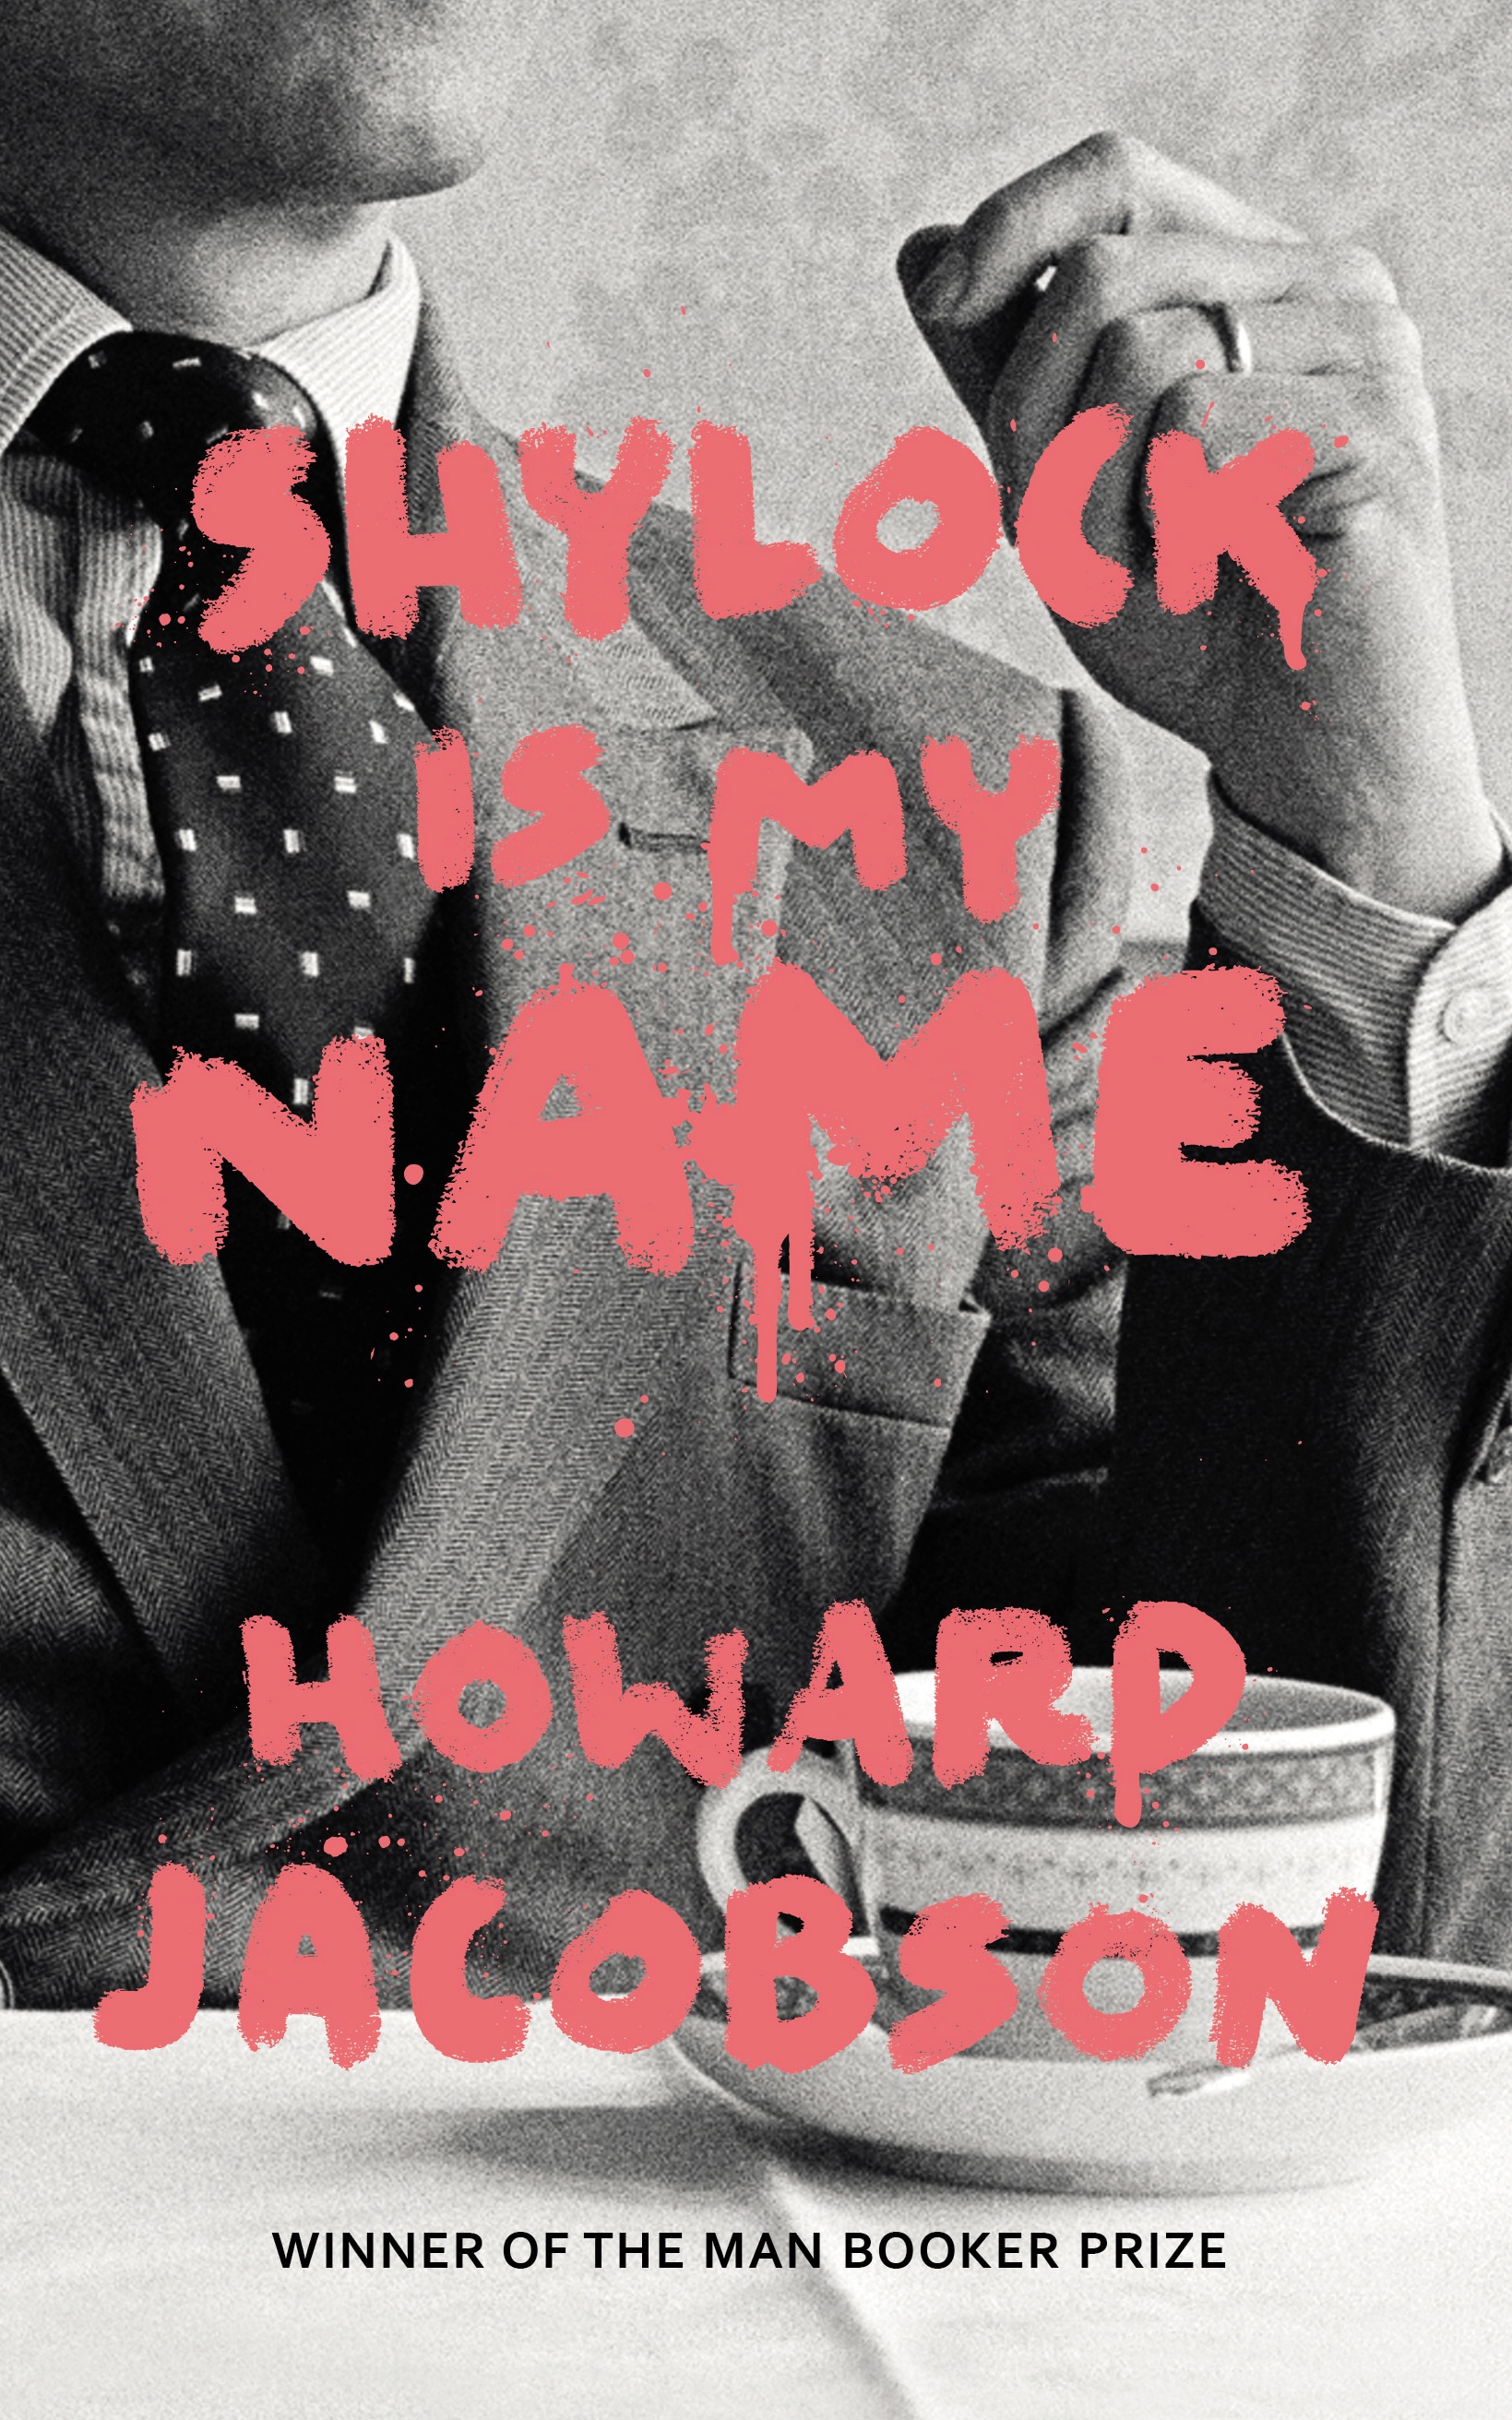 Book “Shylock is My Name” by Howard Jacobson — August 4, 2016